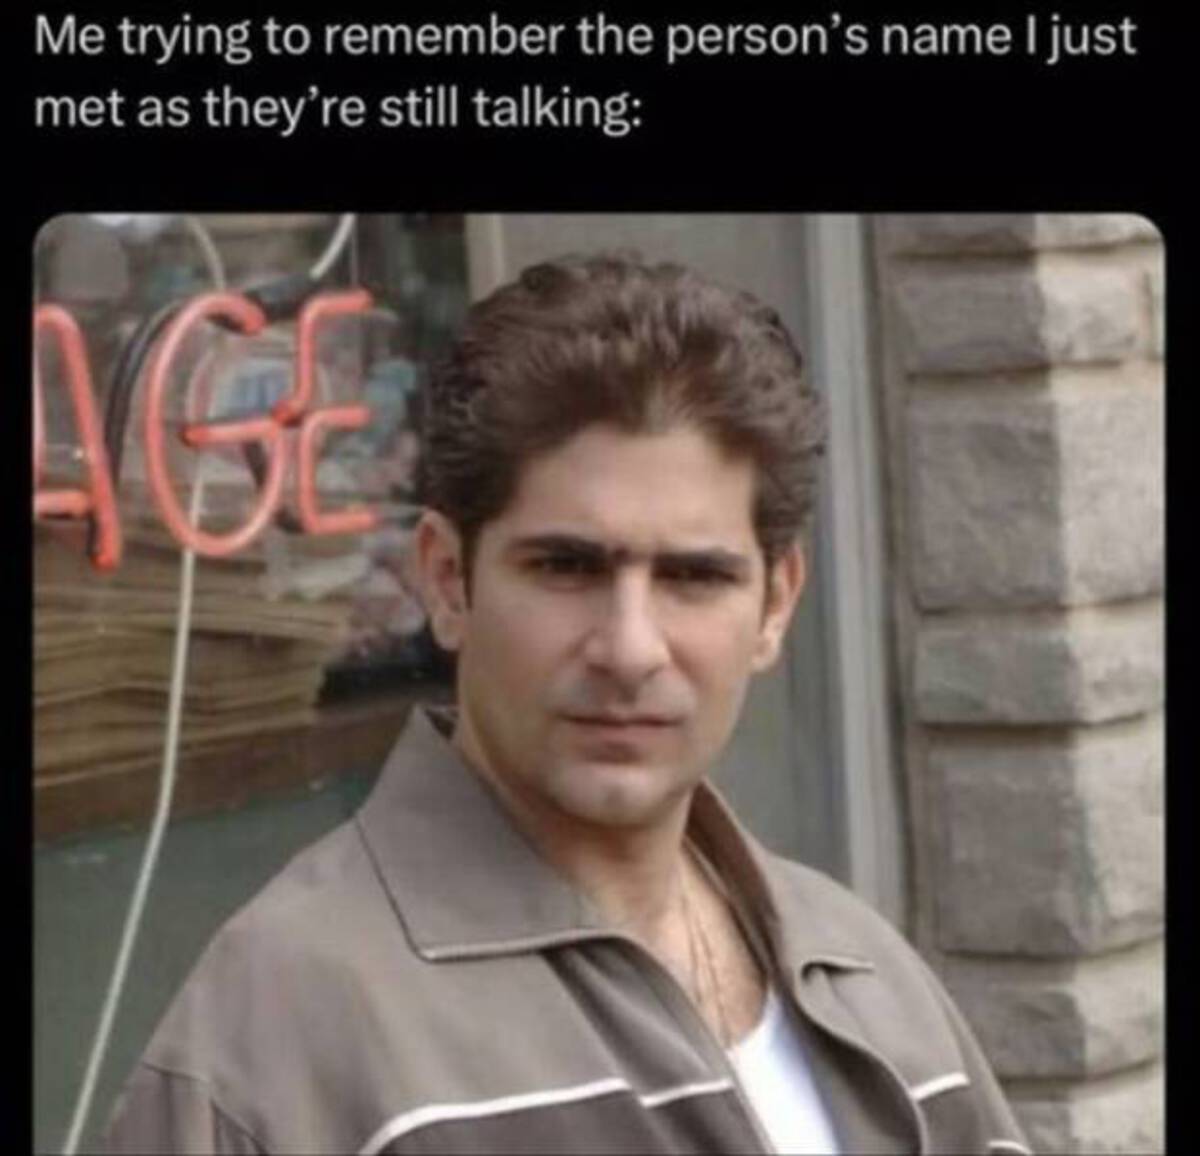 christopher moltisanti - Me trying to remember the person's name I just met as they're still talking Age